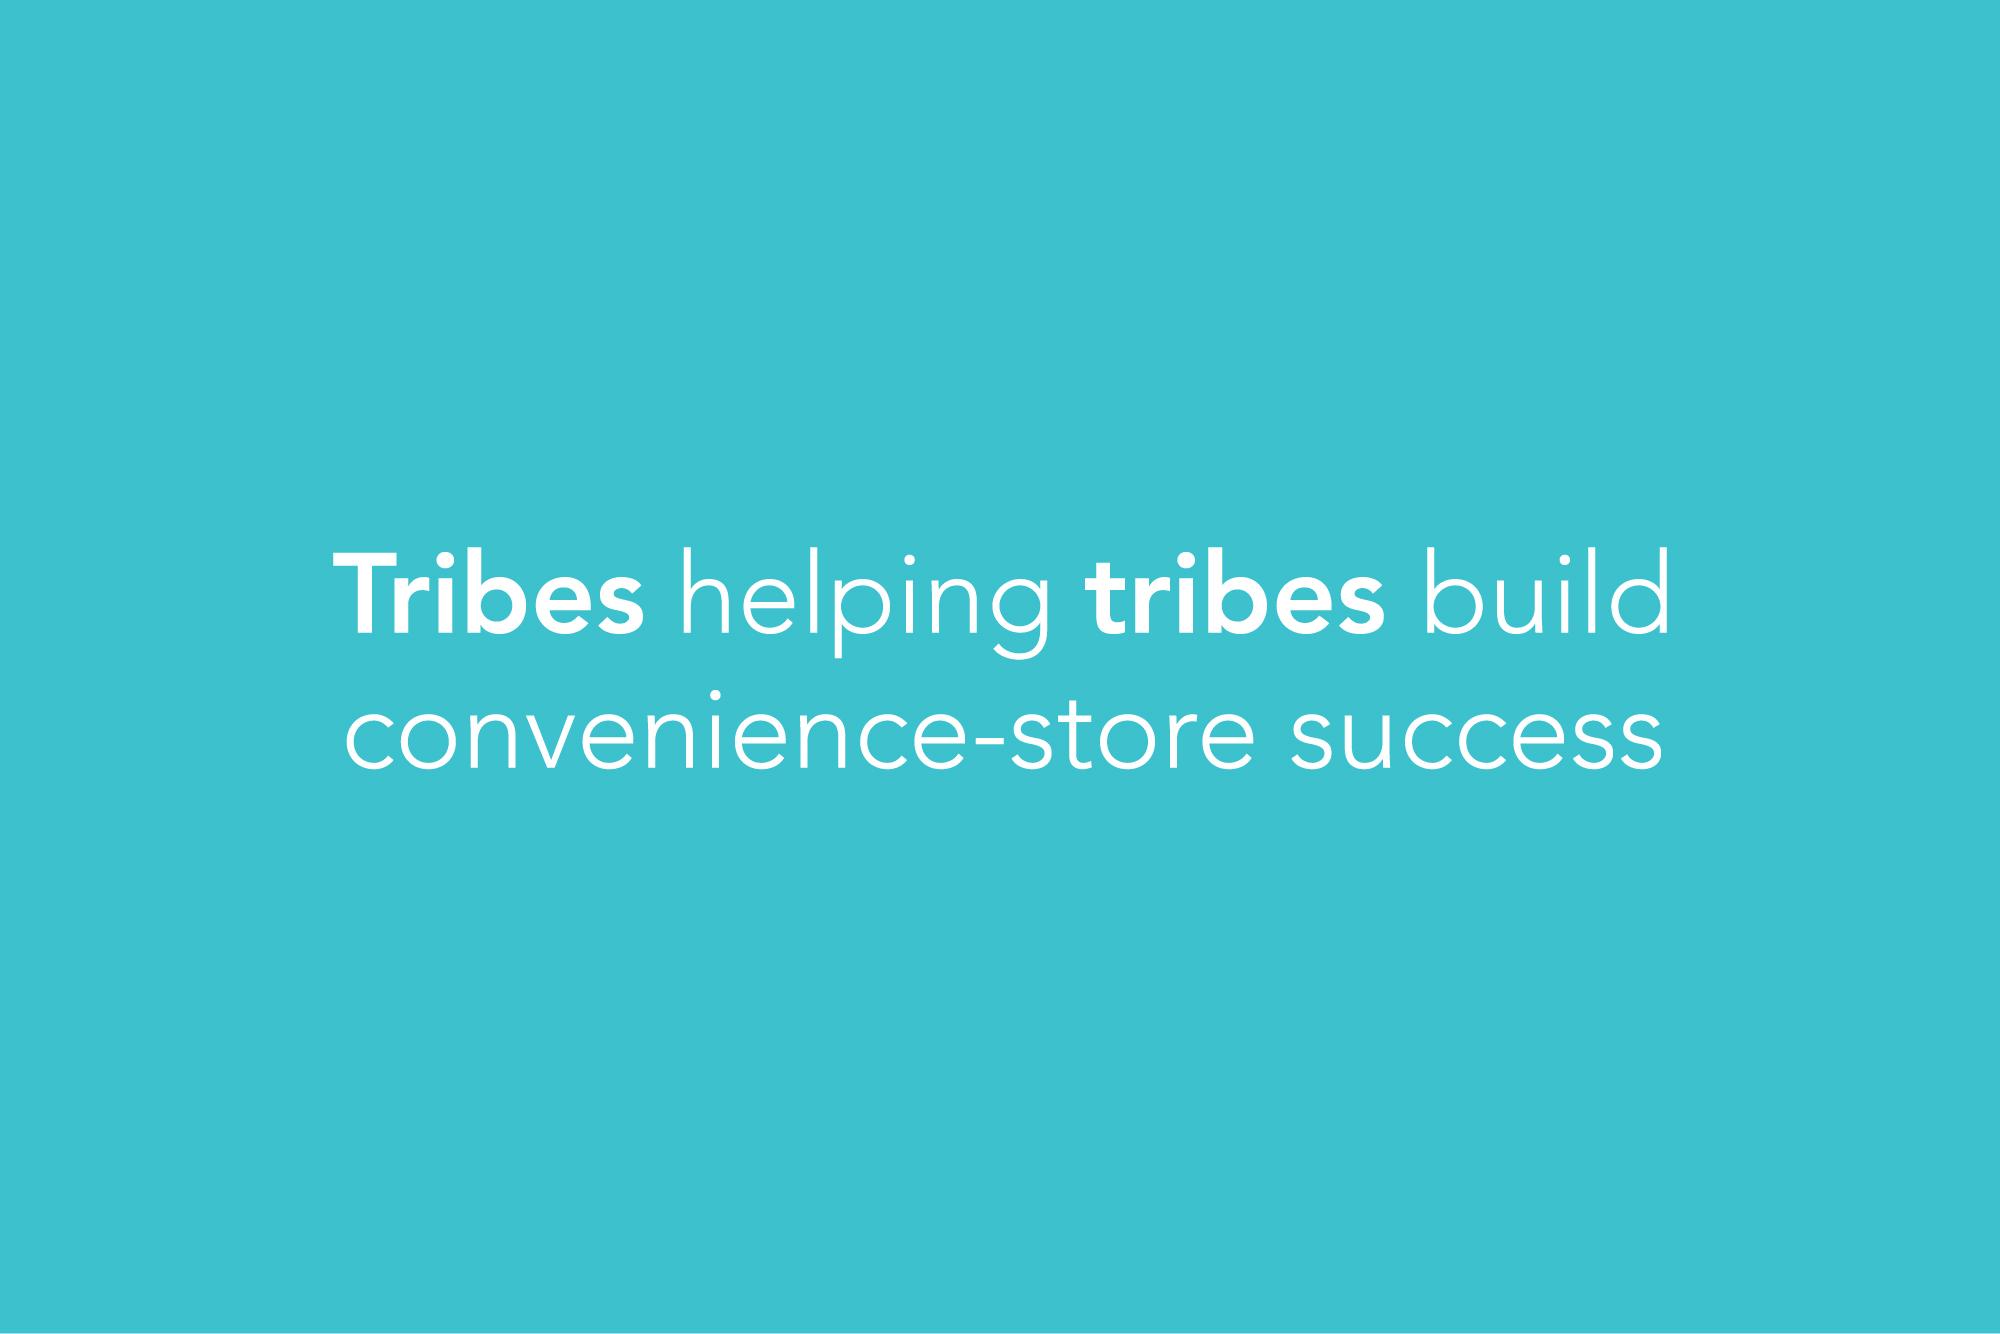 Tagline: Tribes helping tribes build convenience store success